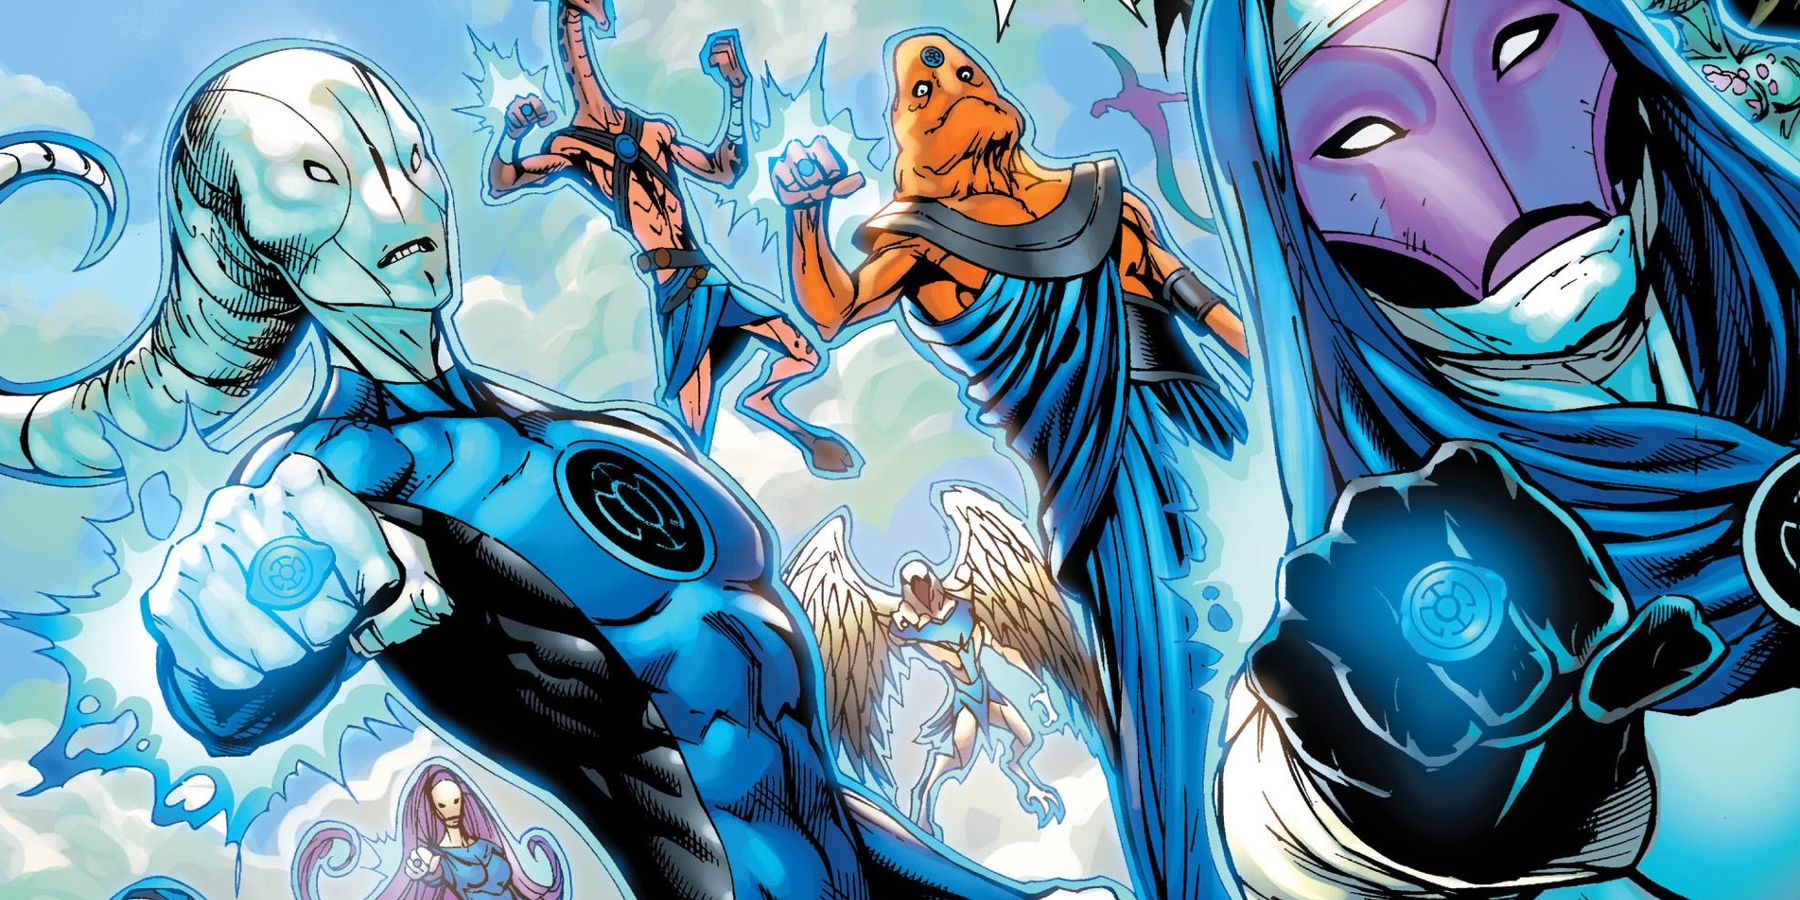 Saint Walker and the Blue Lantern Corps speaking their oath while aiming their Power Rings in DC comics